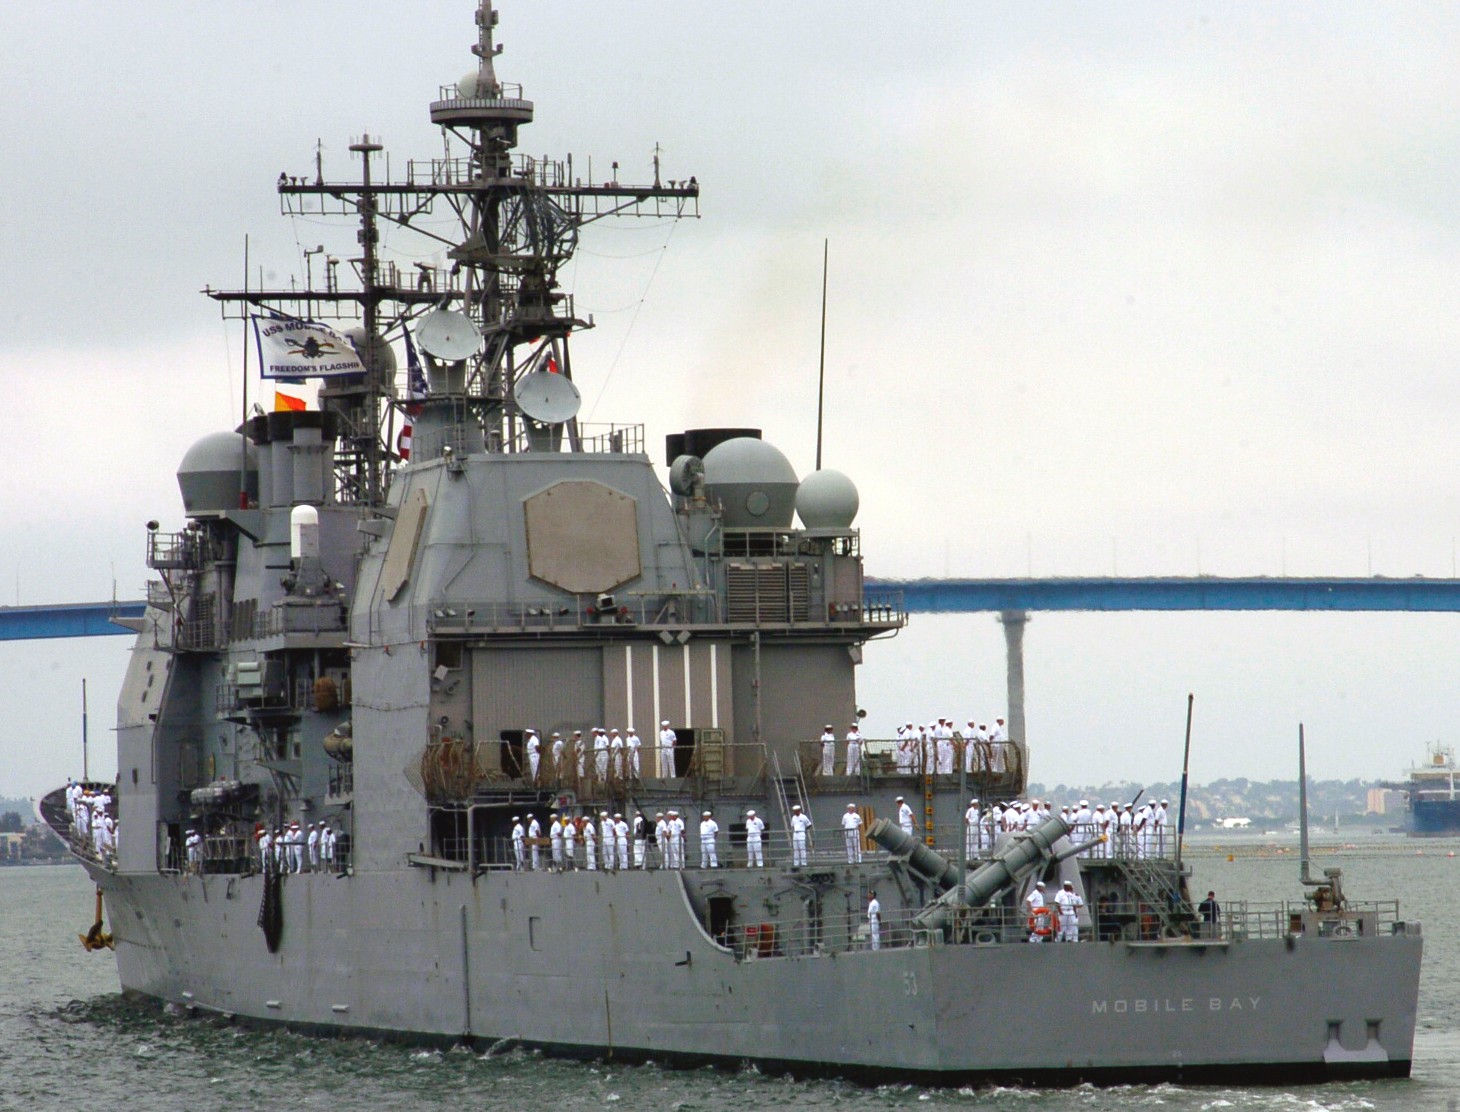 cg-53 uss mobile bay ticonderoga class guided missile cruiser aegis us navy 30